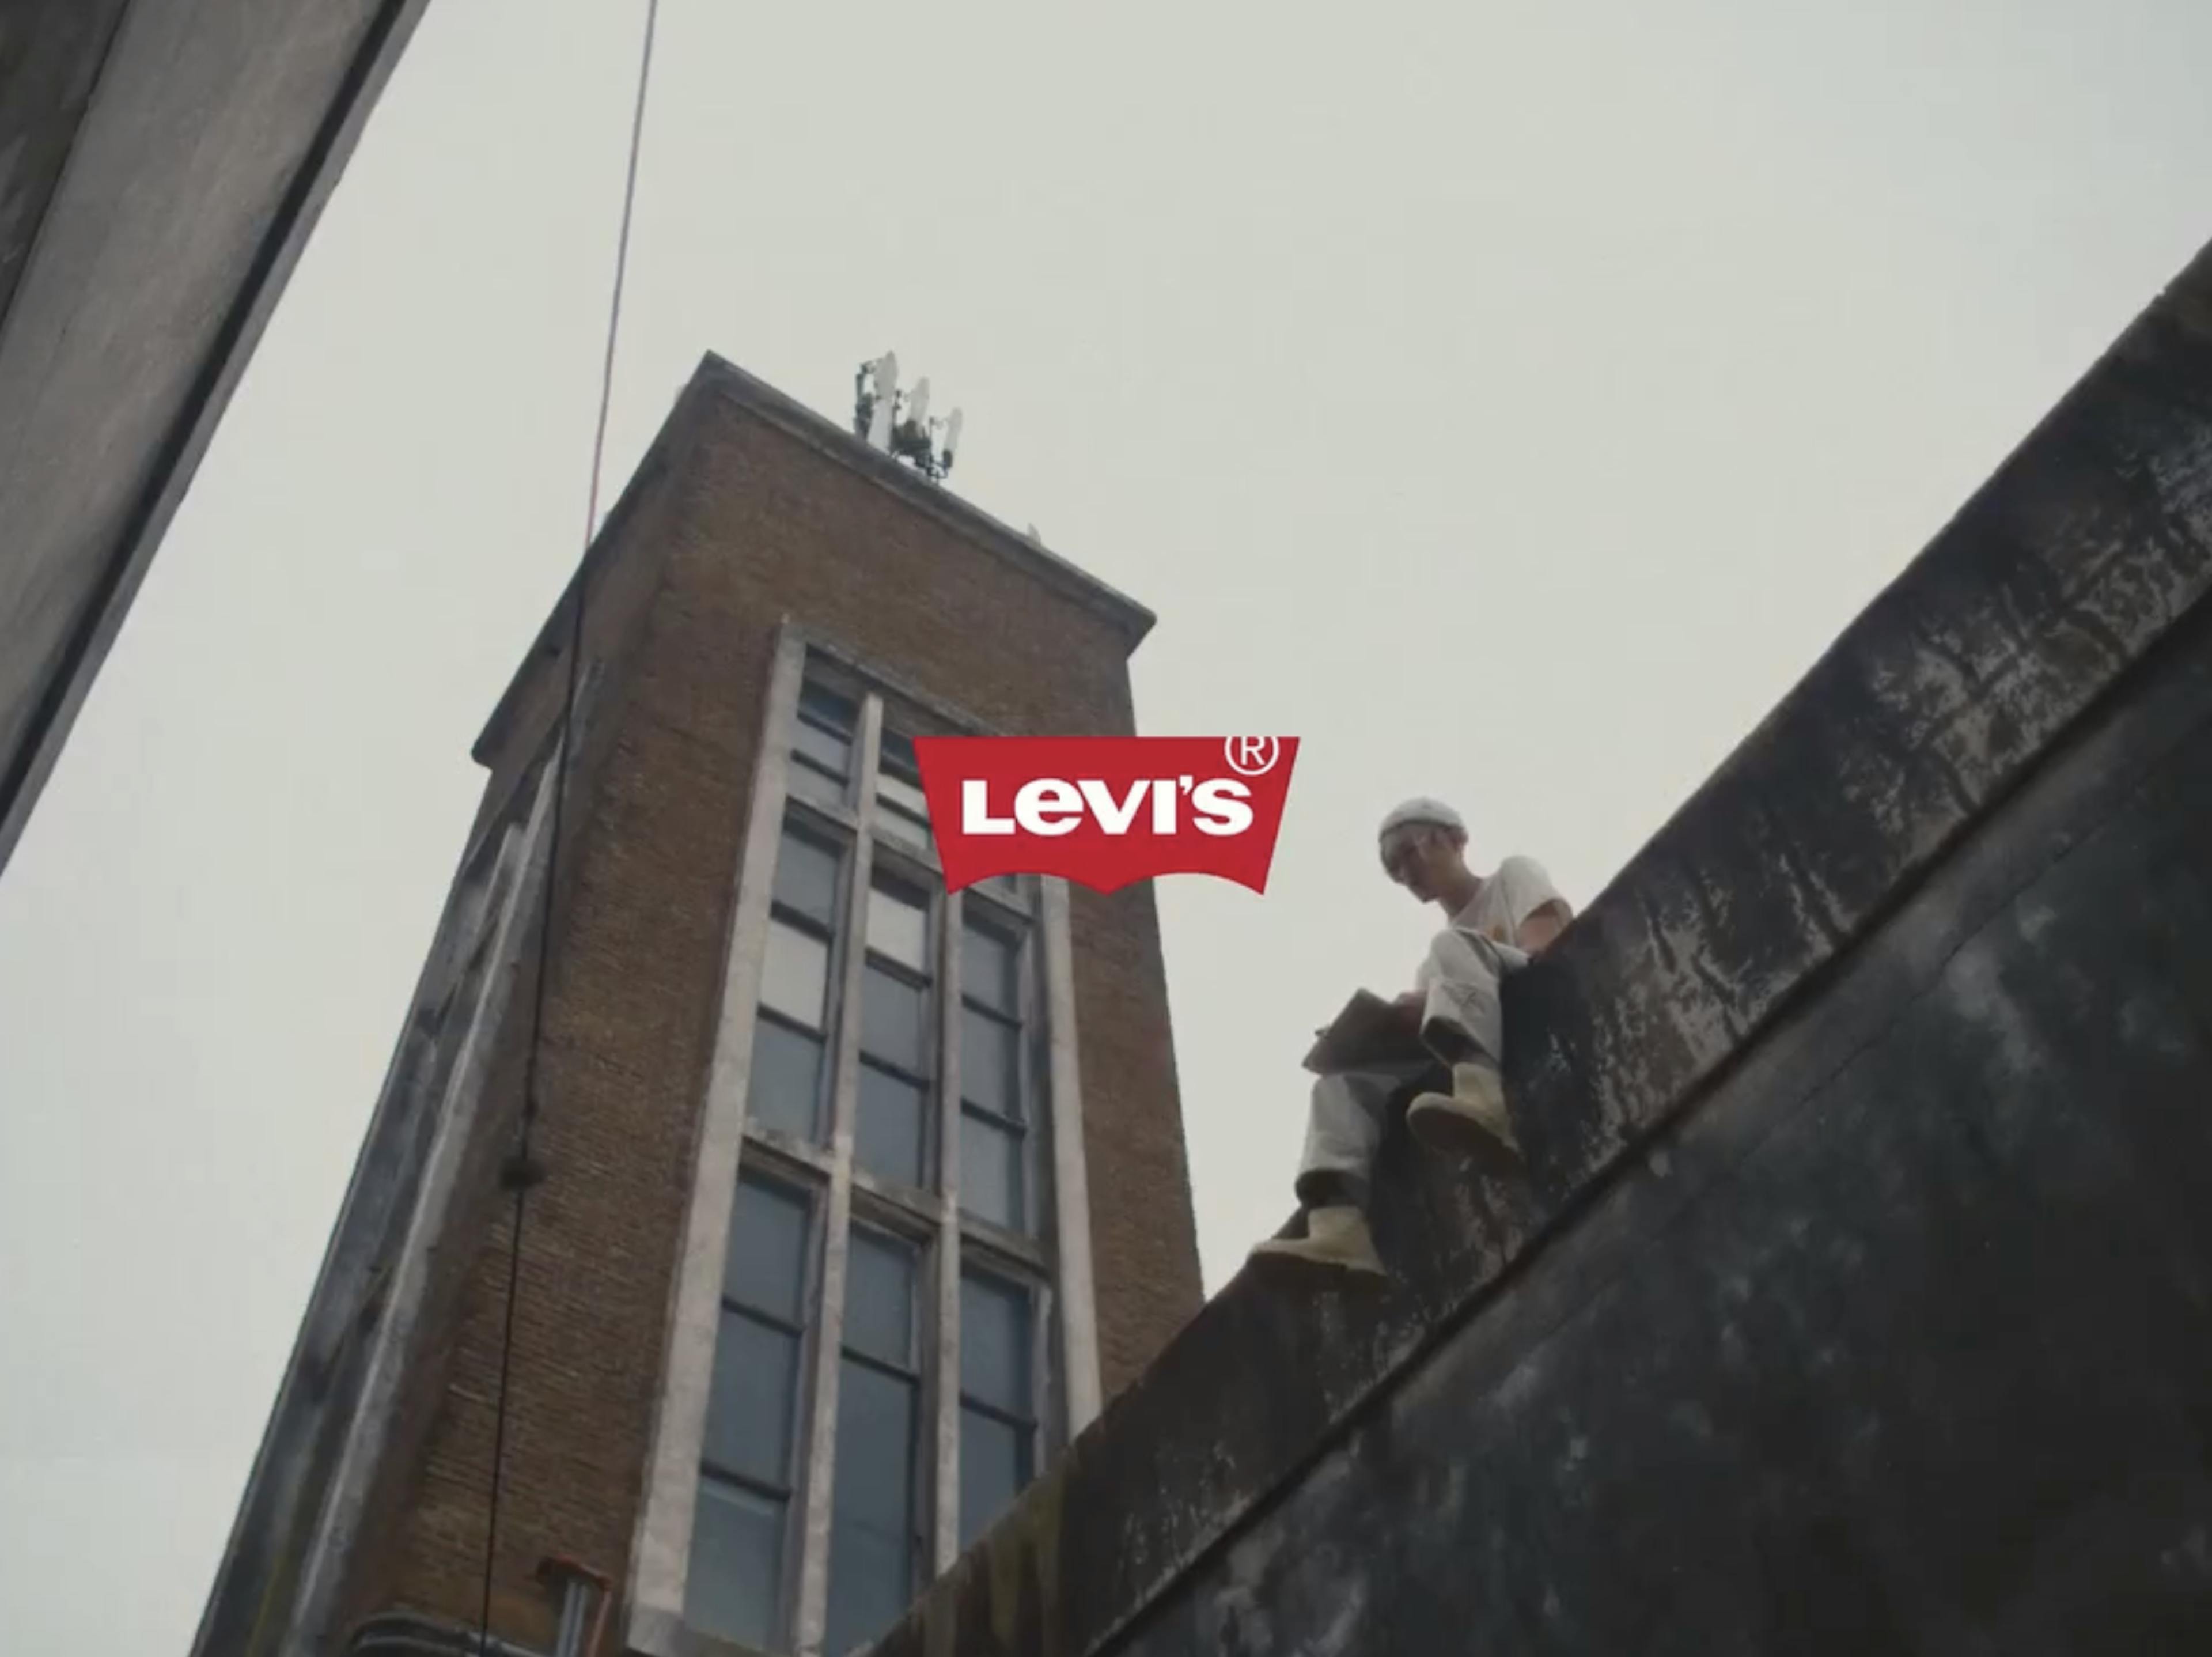 Levi's ad with buildings